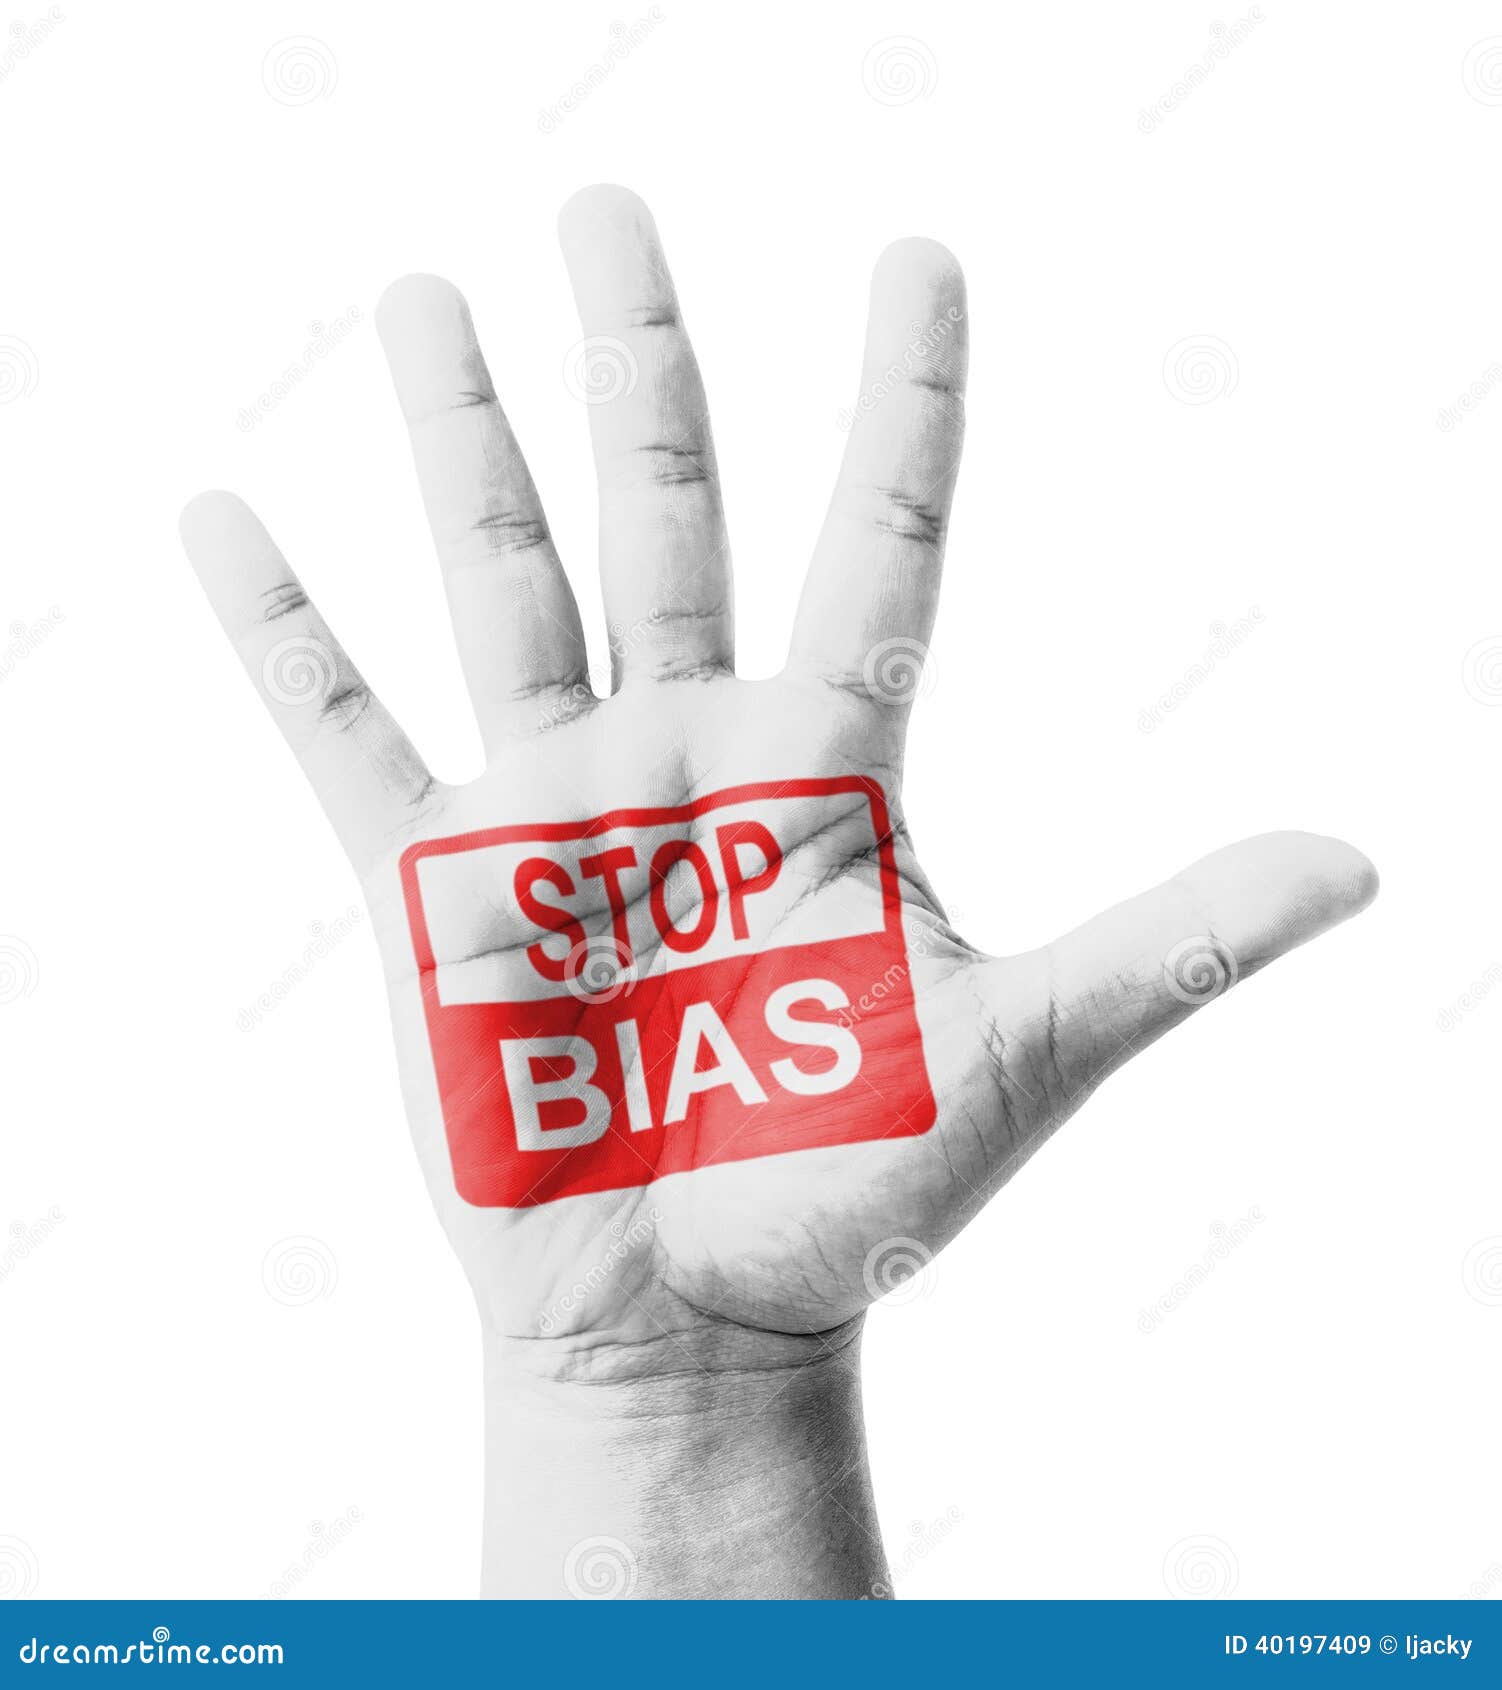 open hand raised, stop bias sign painted